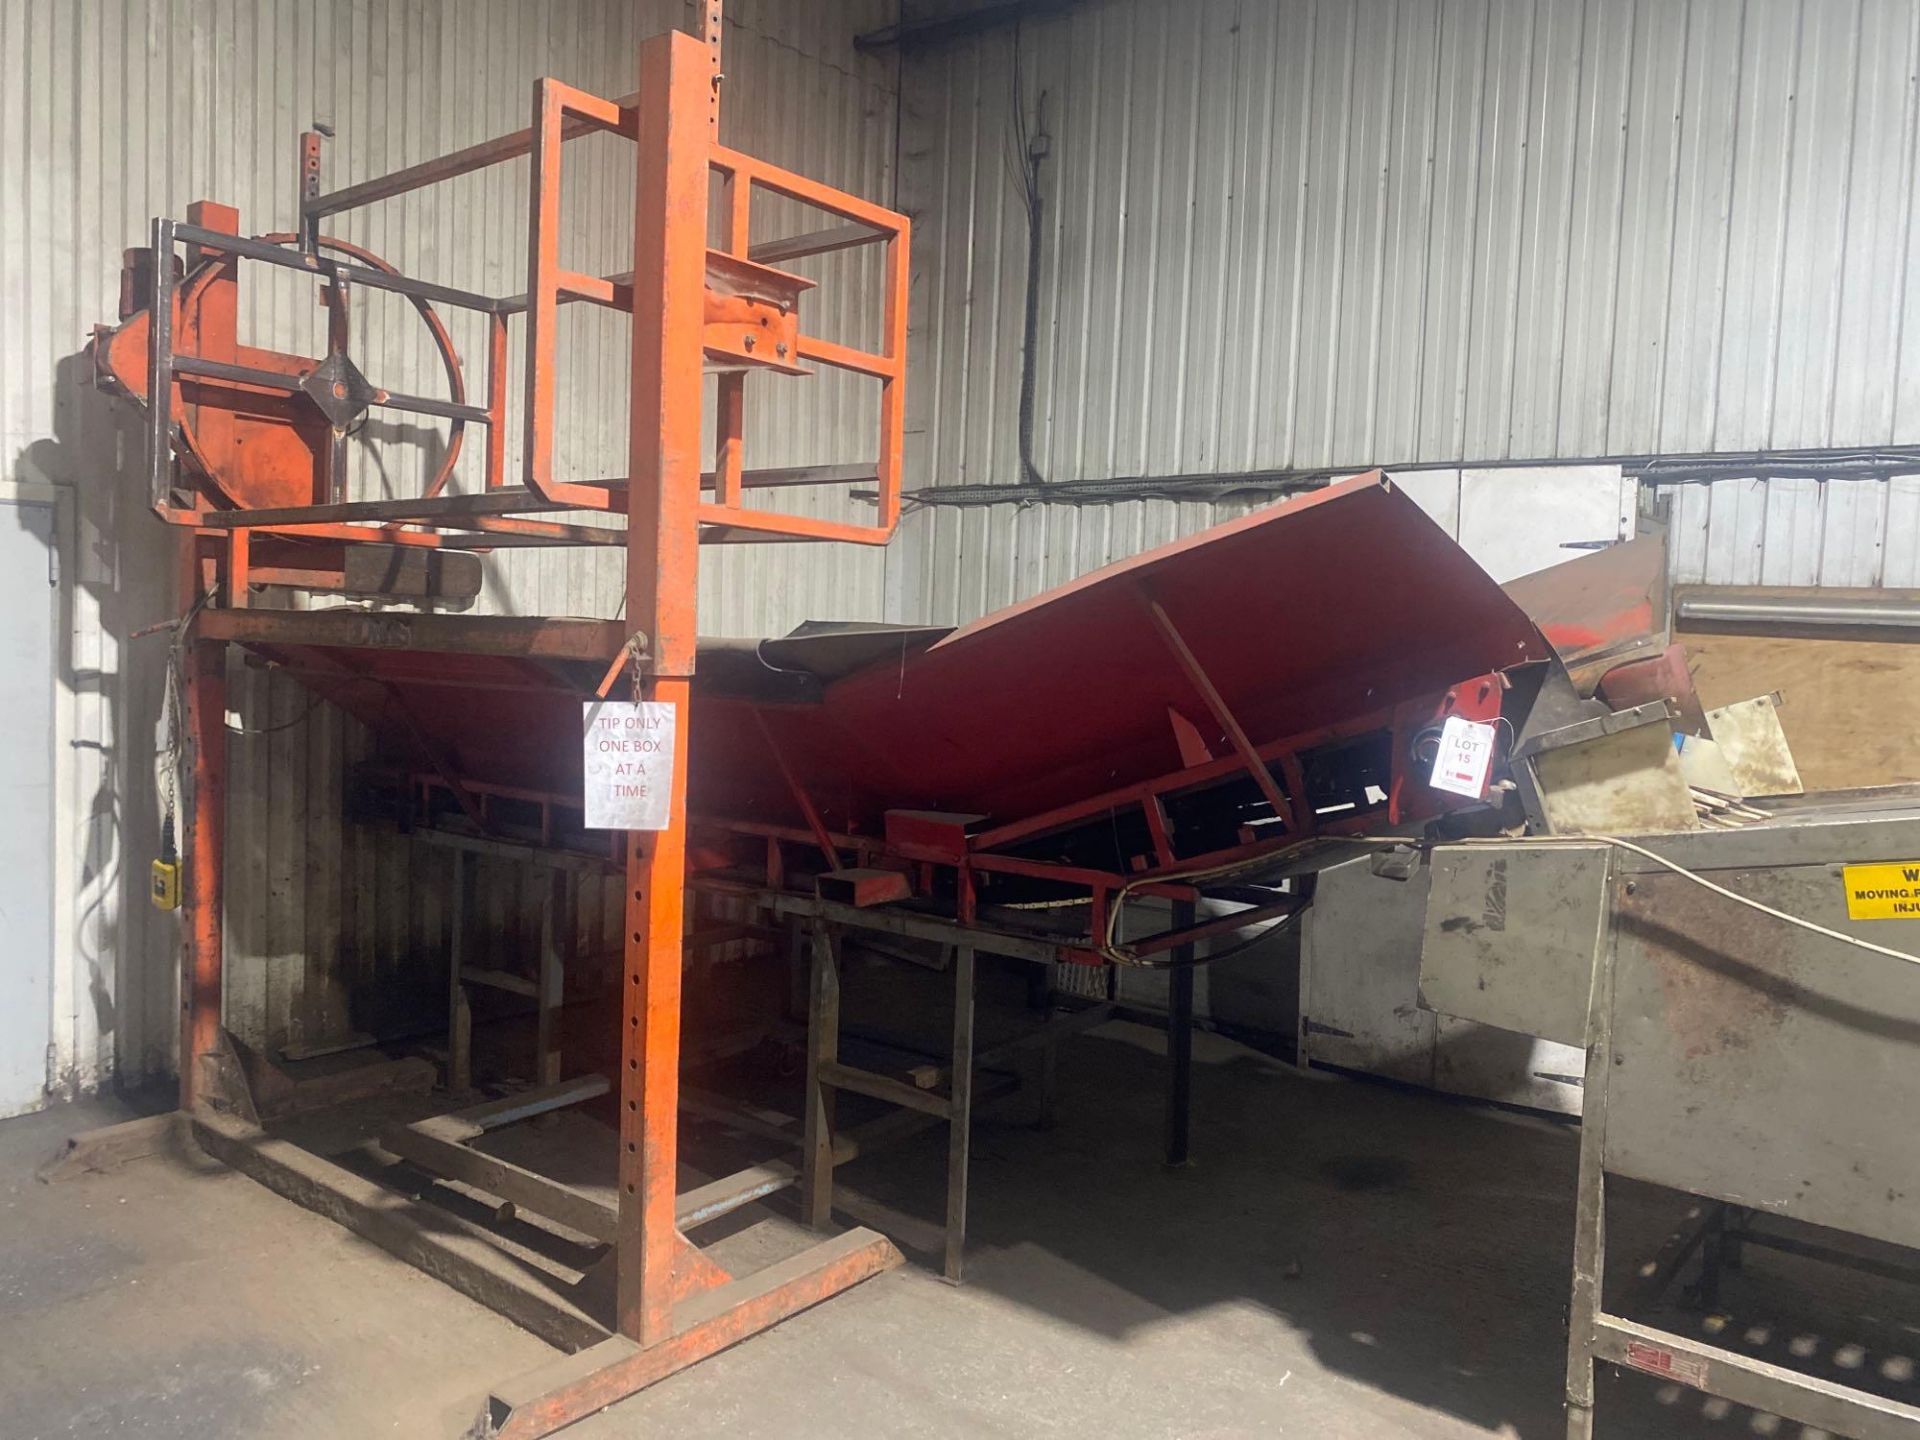 Downs box tipper and boat infeed conveyor